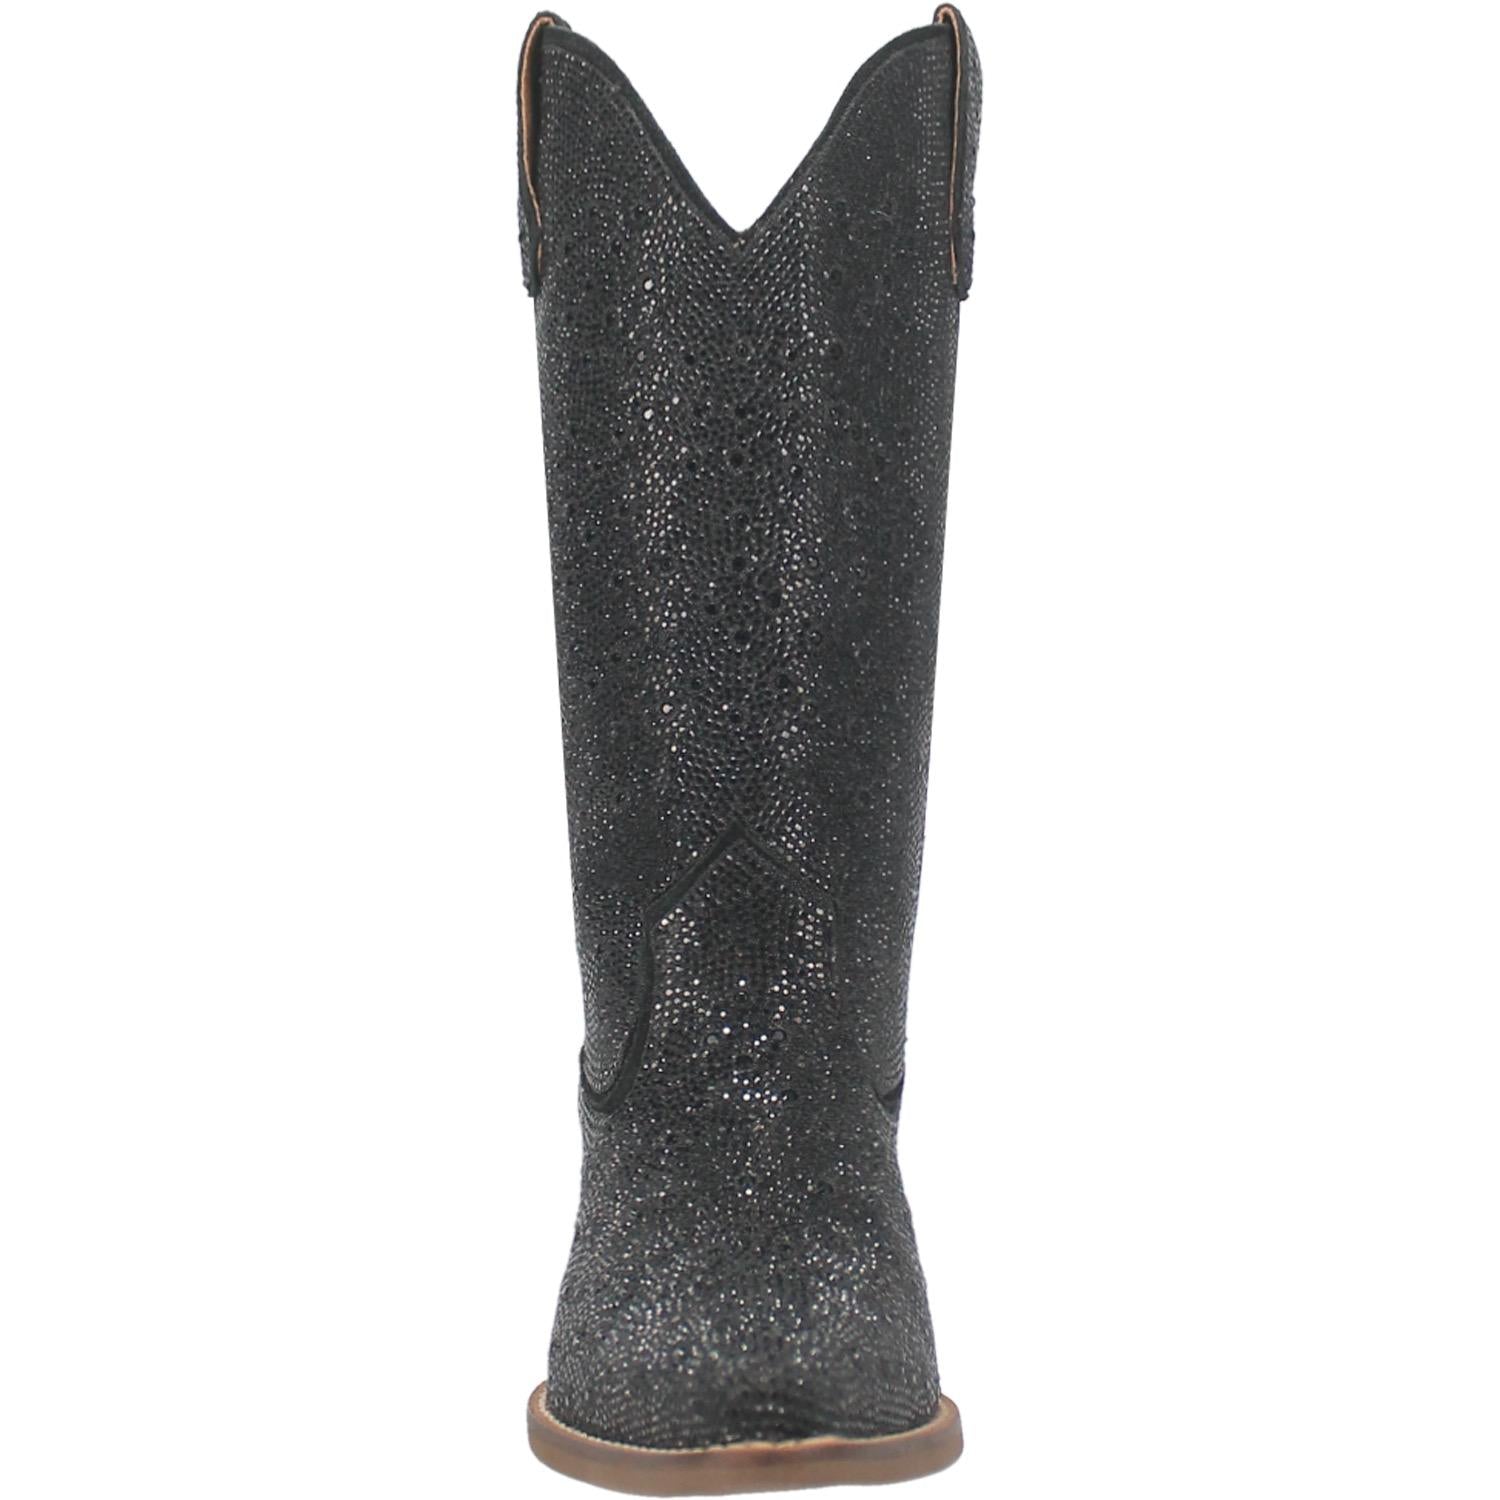 A mid calf length yellow cow print boot. Has a short heel, matching straps, a fur texture, and a V cut at the top. Item is pictured on a plain white background